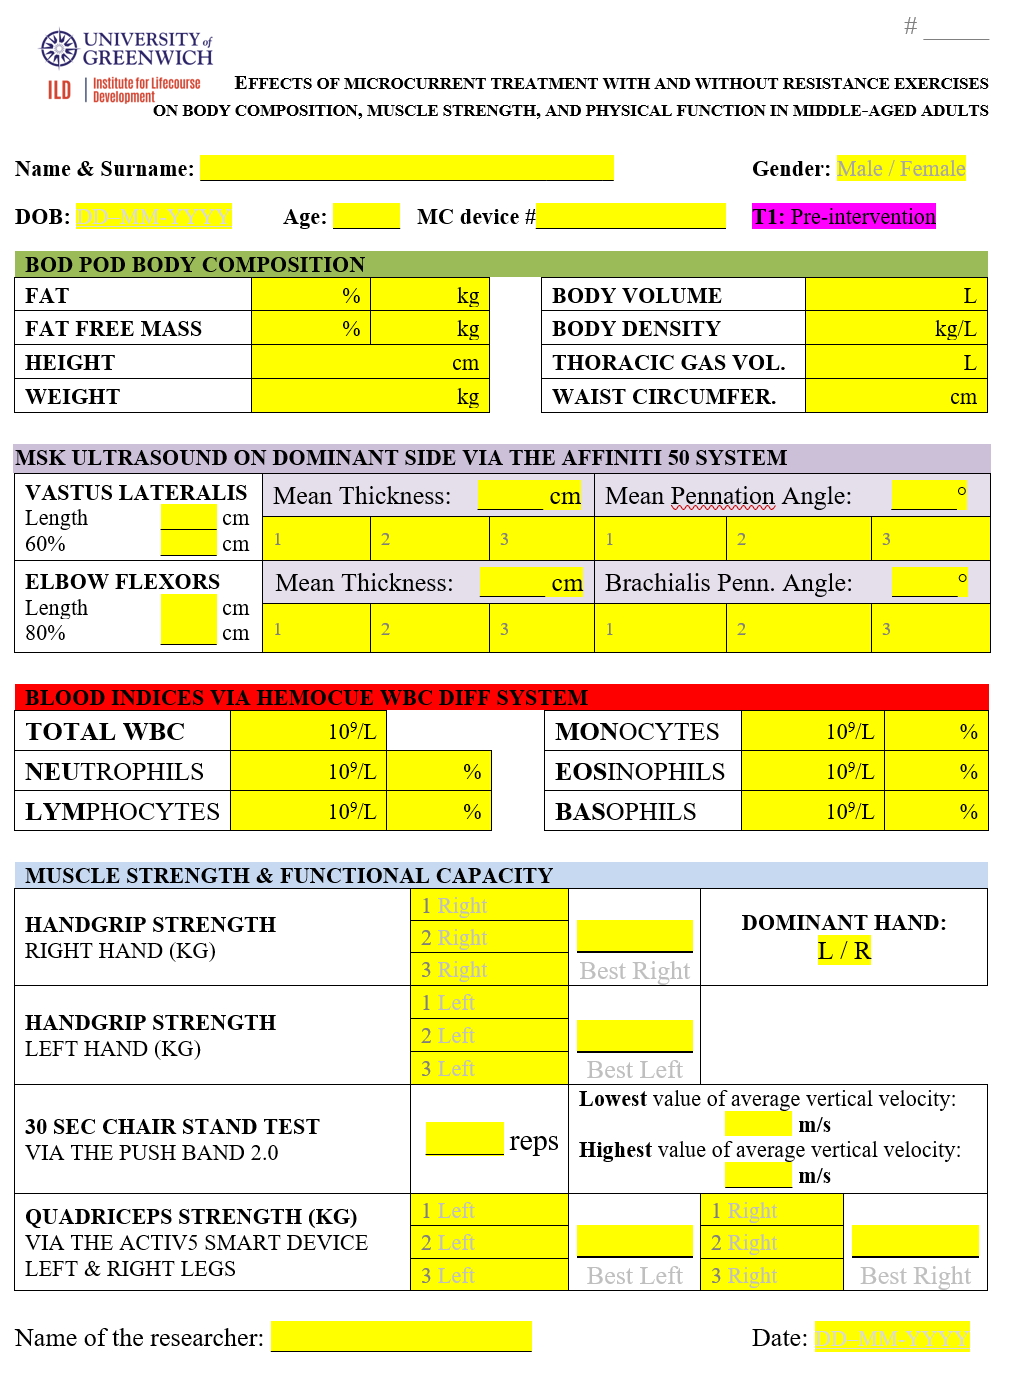 Body Composition Report / Muscle Strength and Function